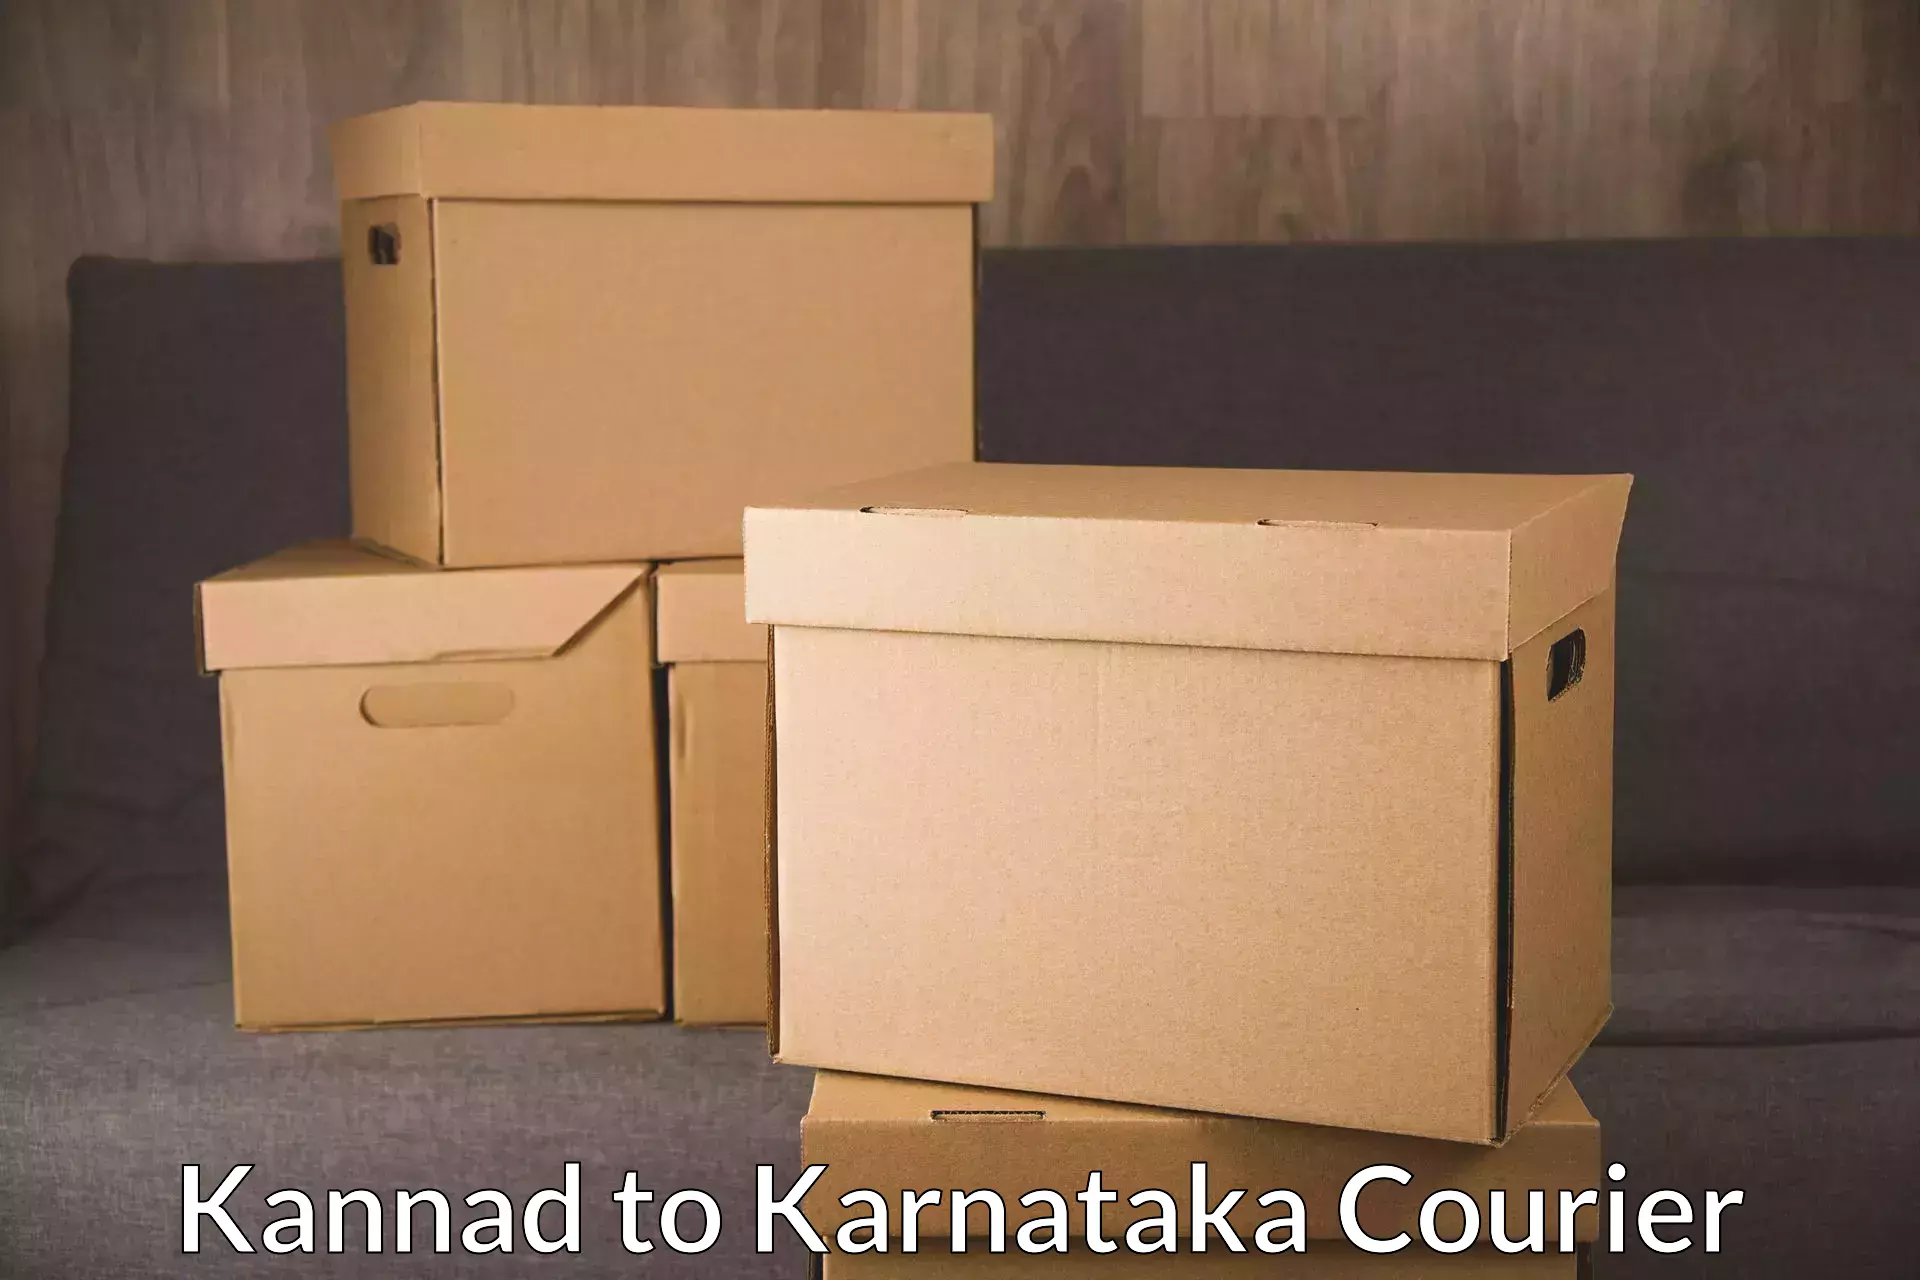 State-of-the-art courier technology Kannad to Gokak